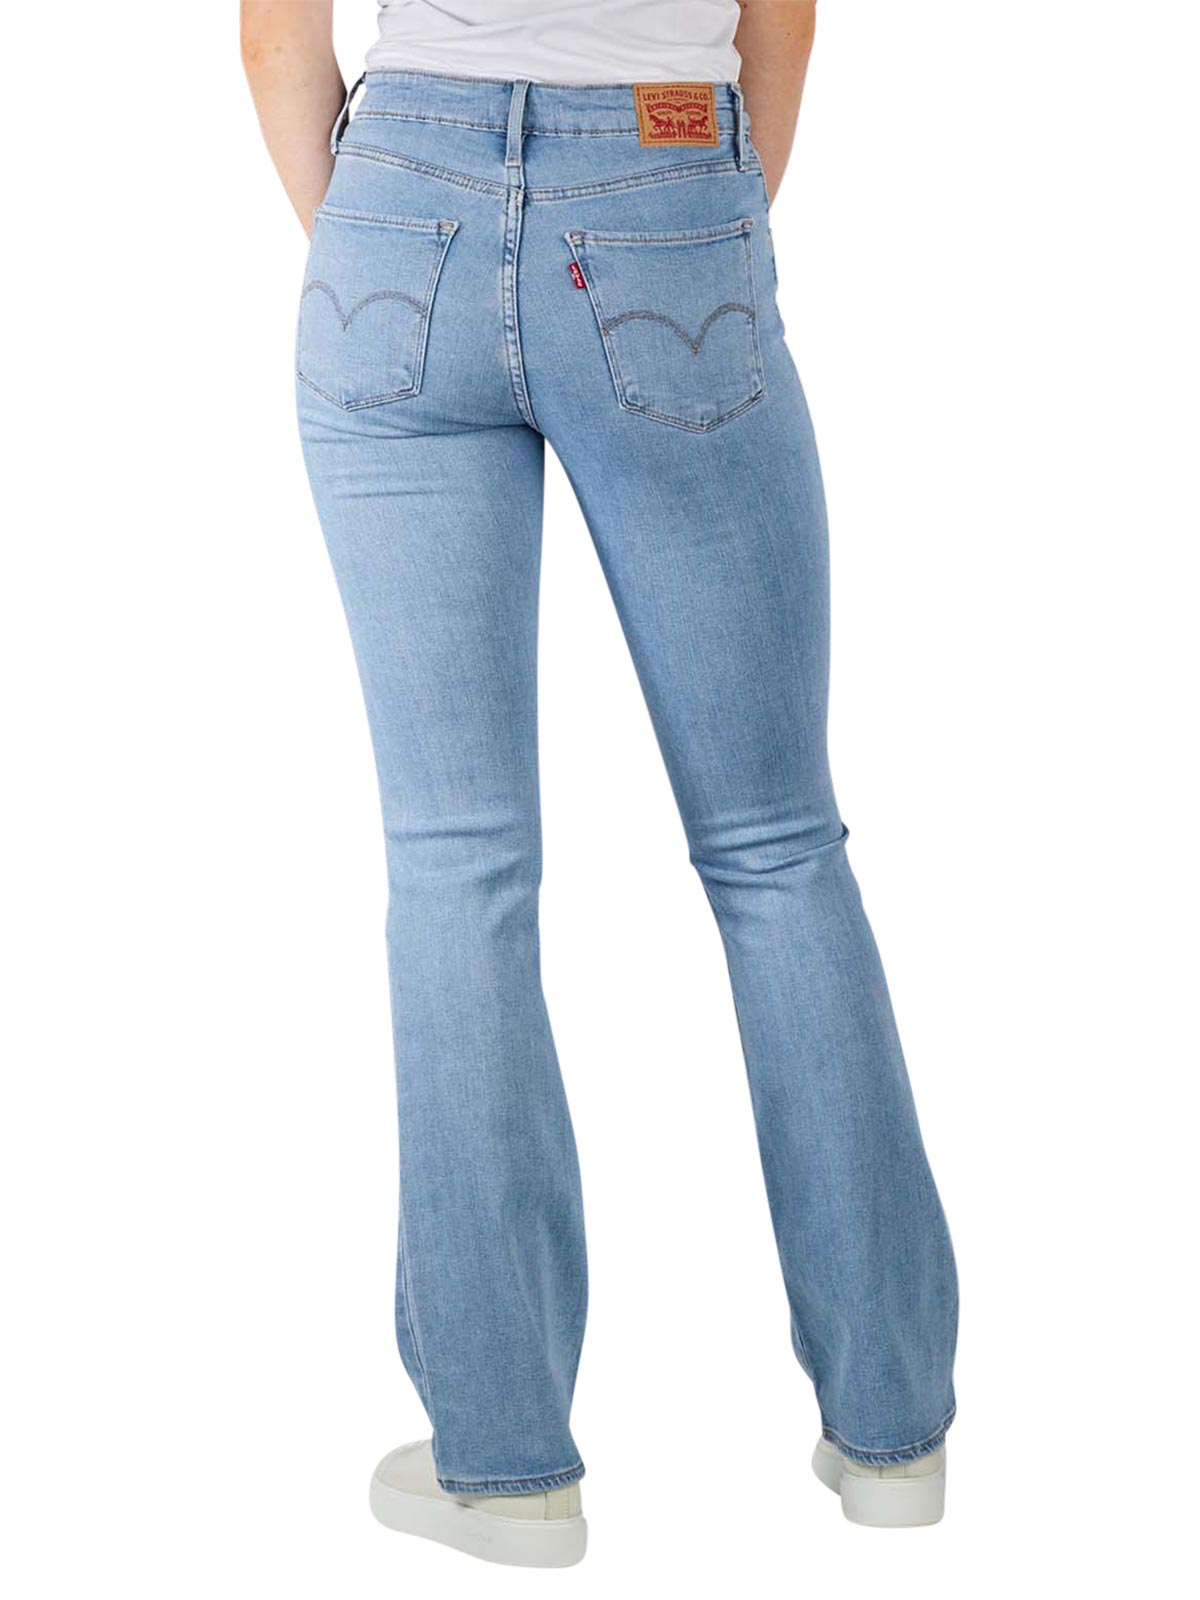 Levi's 725 Jeans Bootcut tribeca light Levi's Women's Jeans | Free Shipping  on  - SIMPLY LOOK GOOD